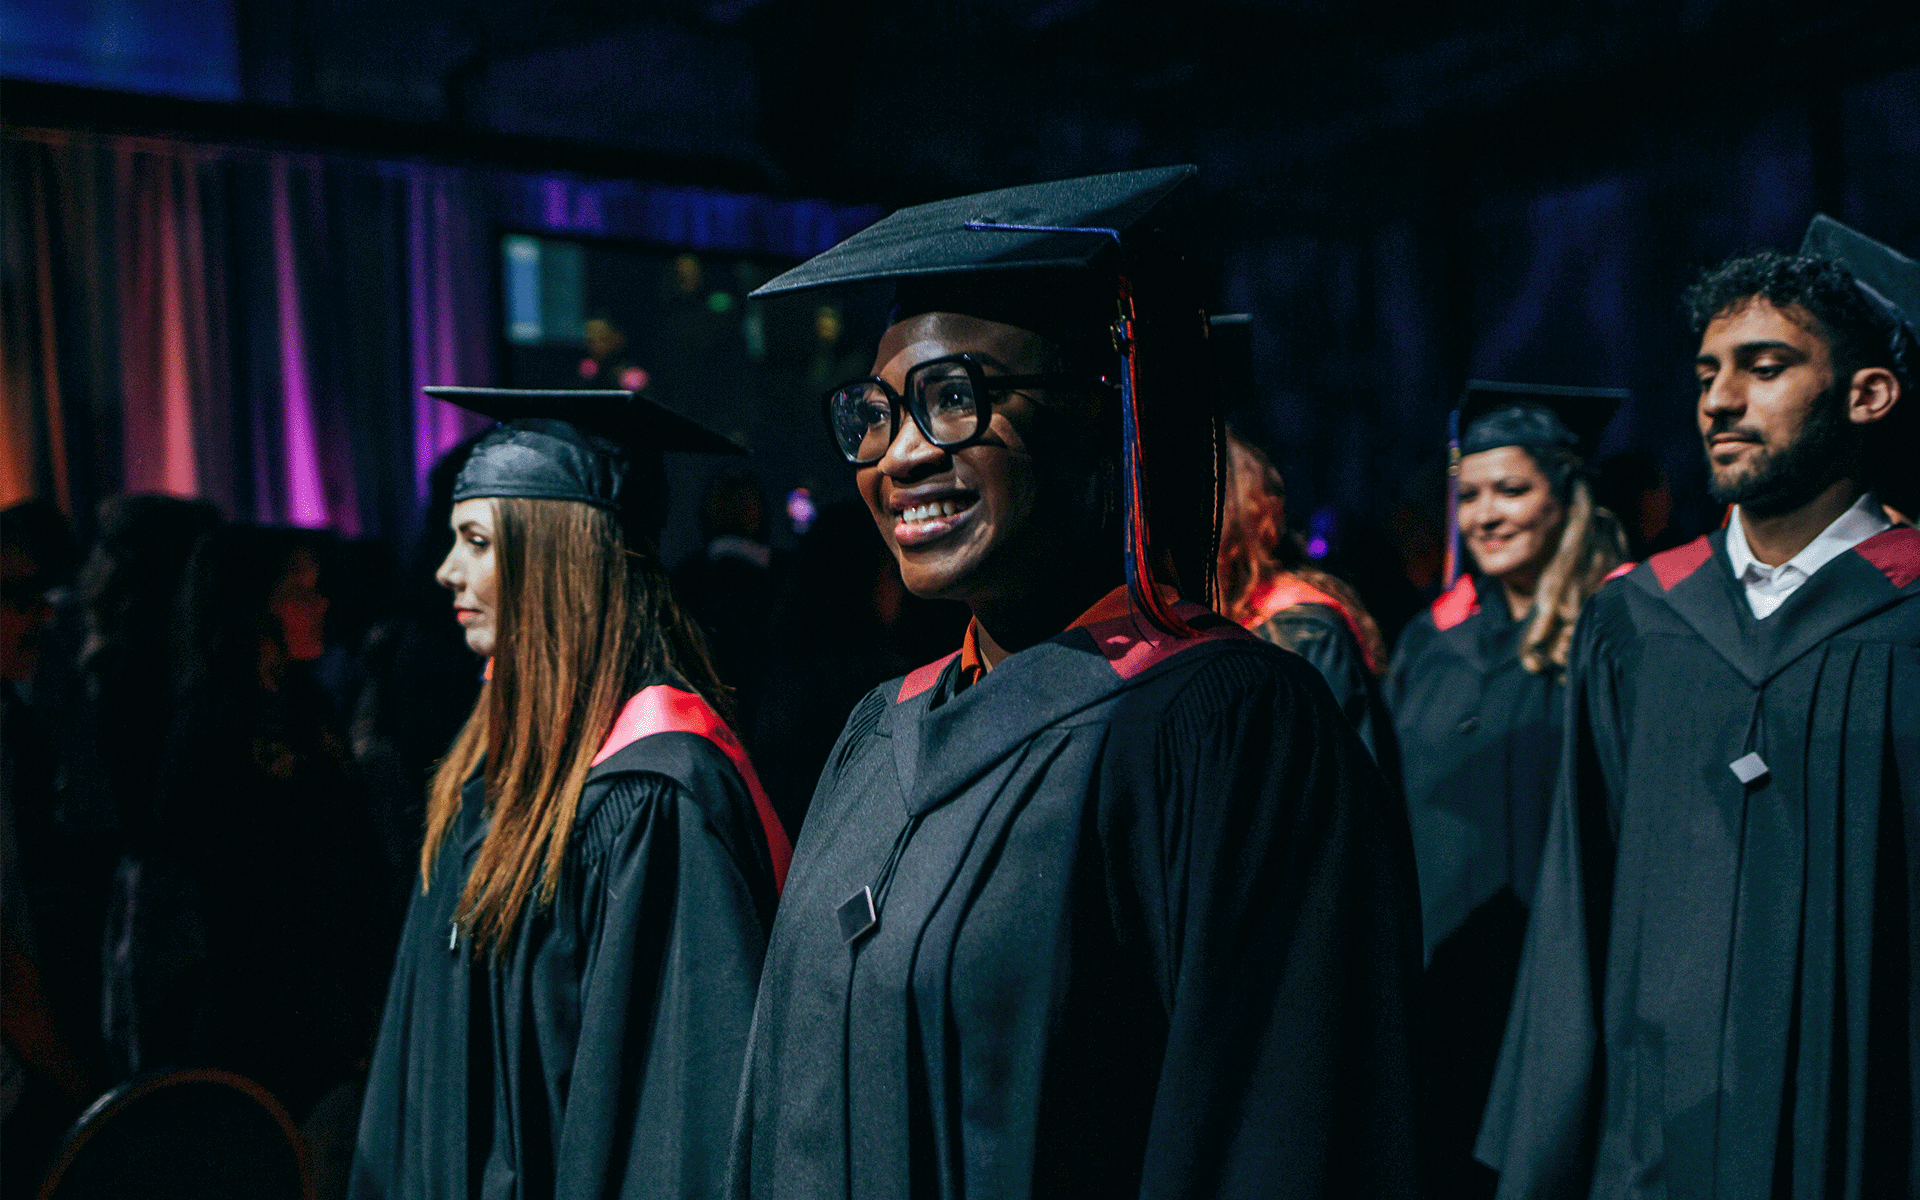 Graduates walking into the ceremony in a procession. Image is focused on a smiling woman